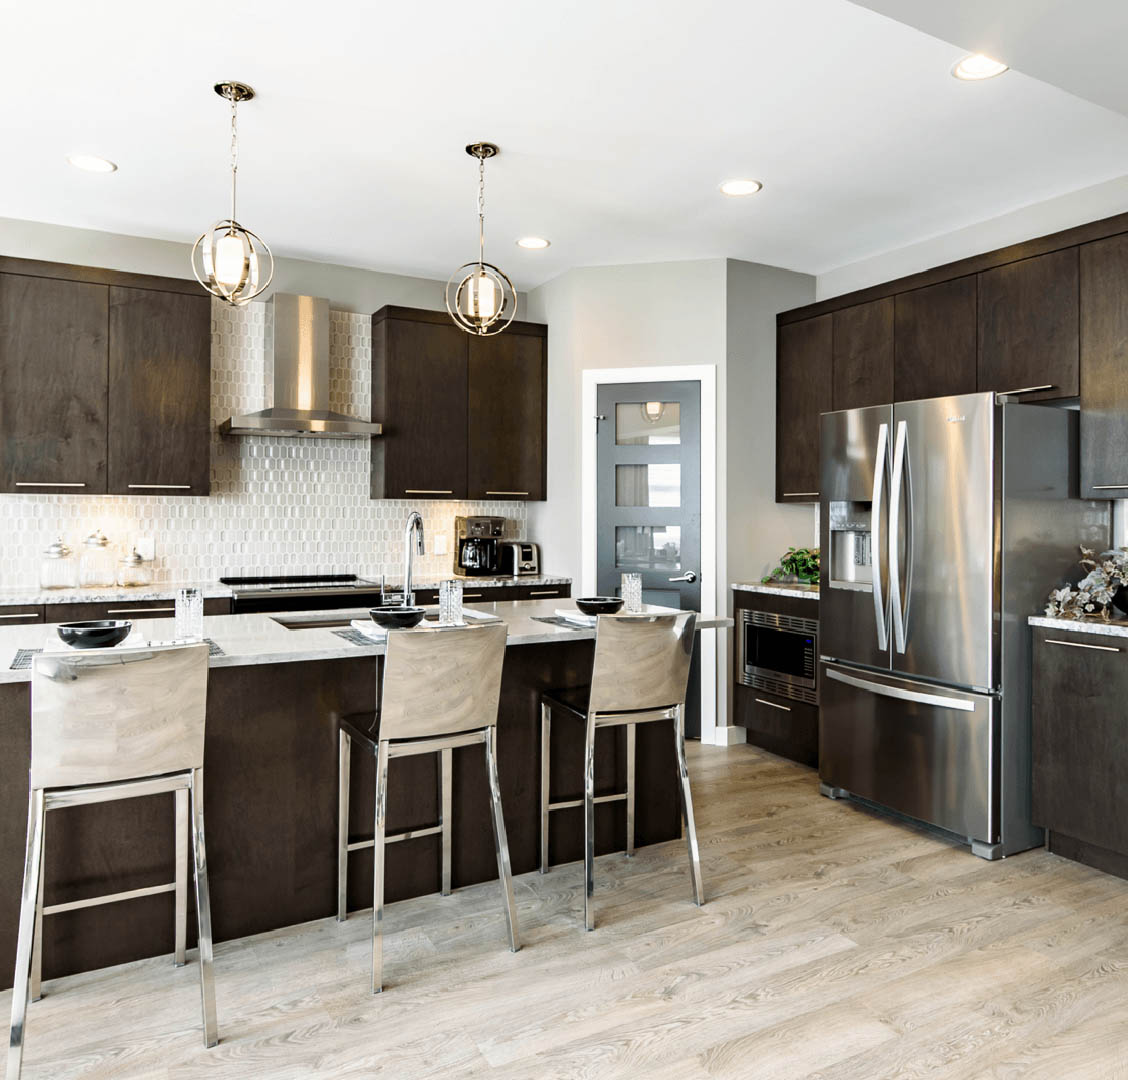 The Pros and Cons of Buying New Versus Resale Homes Kitchen Image